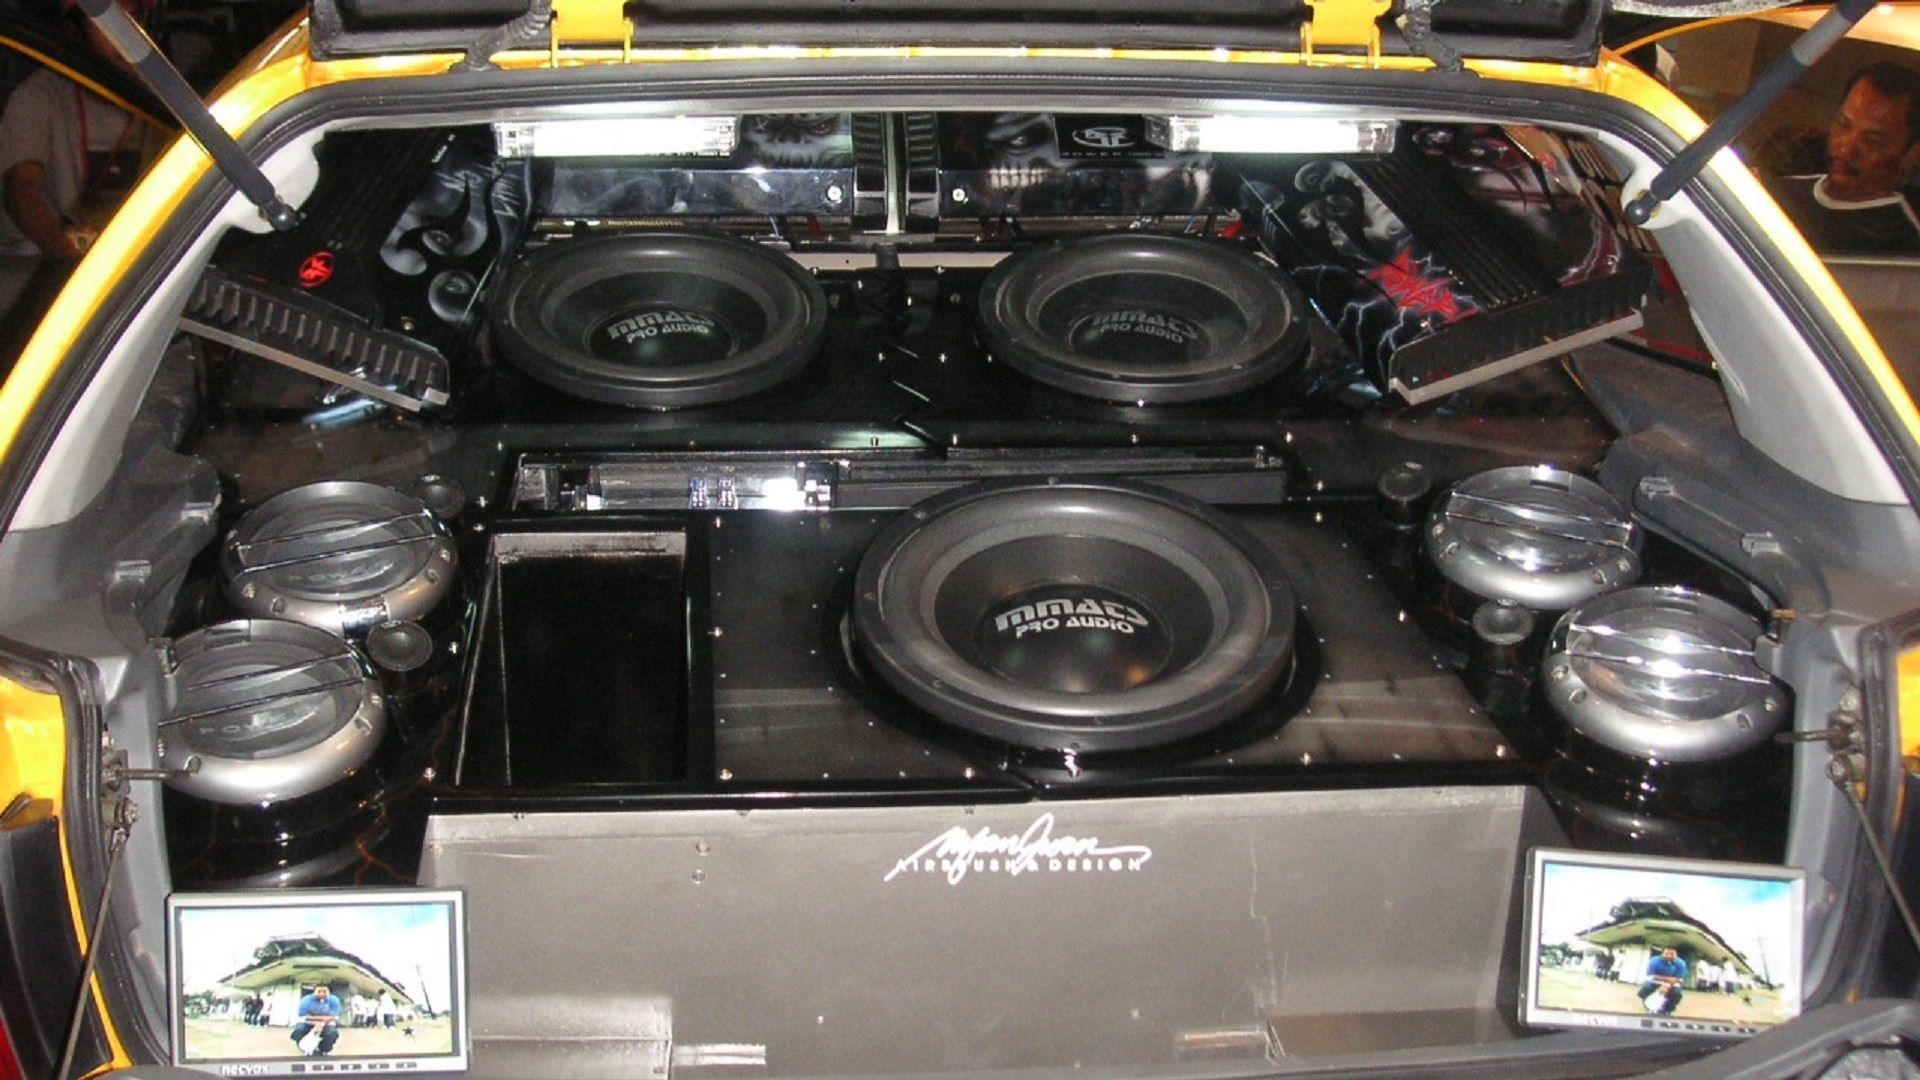 A parked hatchback showing off its bass stereo system